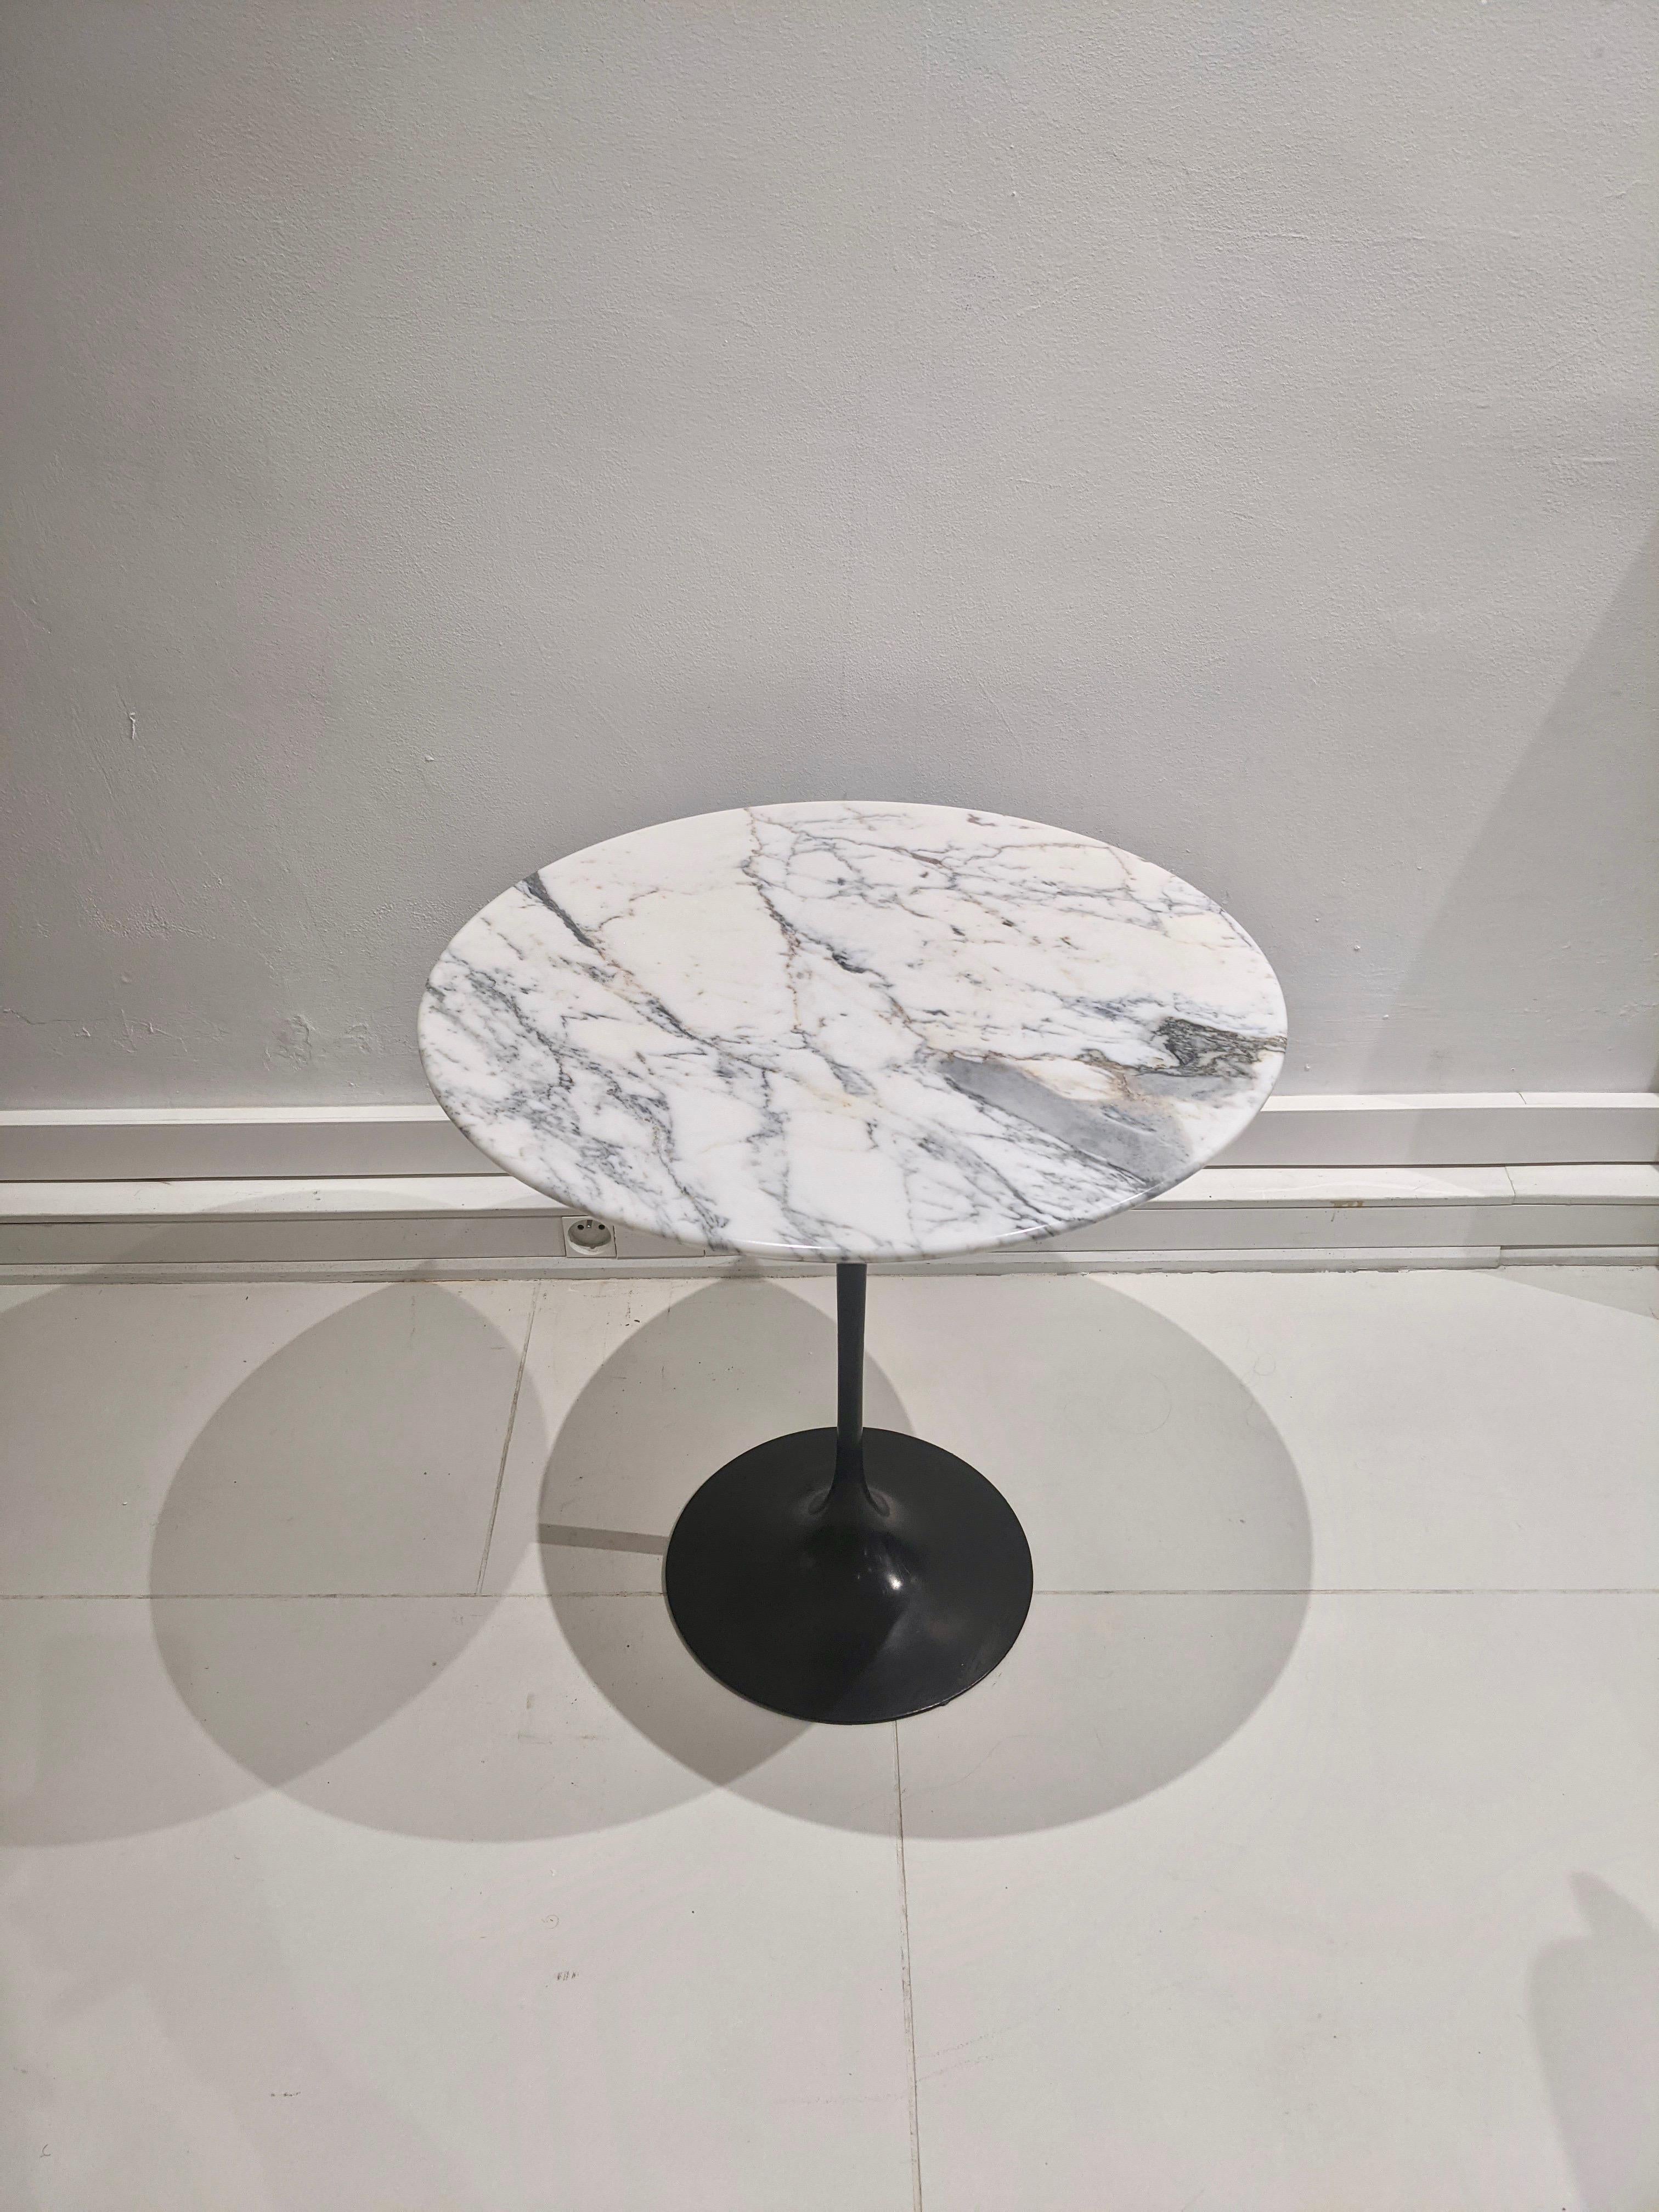 Pedestal table by Eero Saarinen with white marble top and black base for Knoll. Very good condition. The marble top is not original.